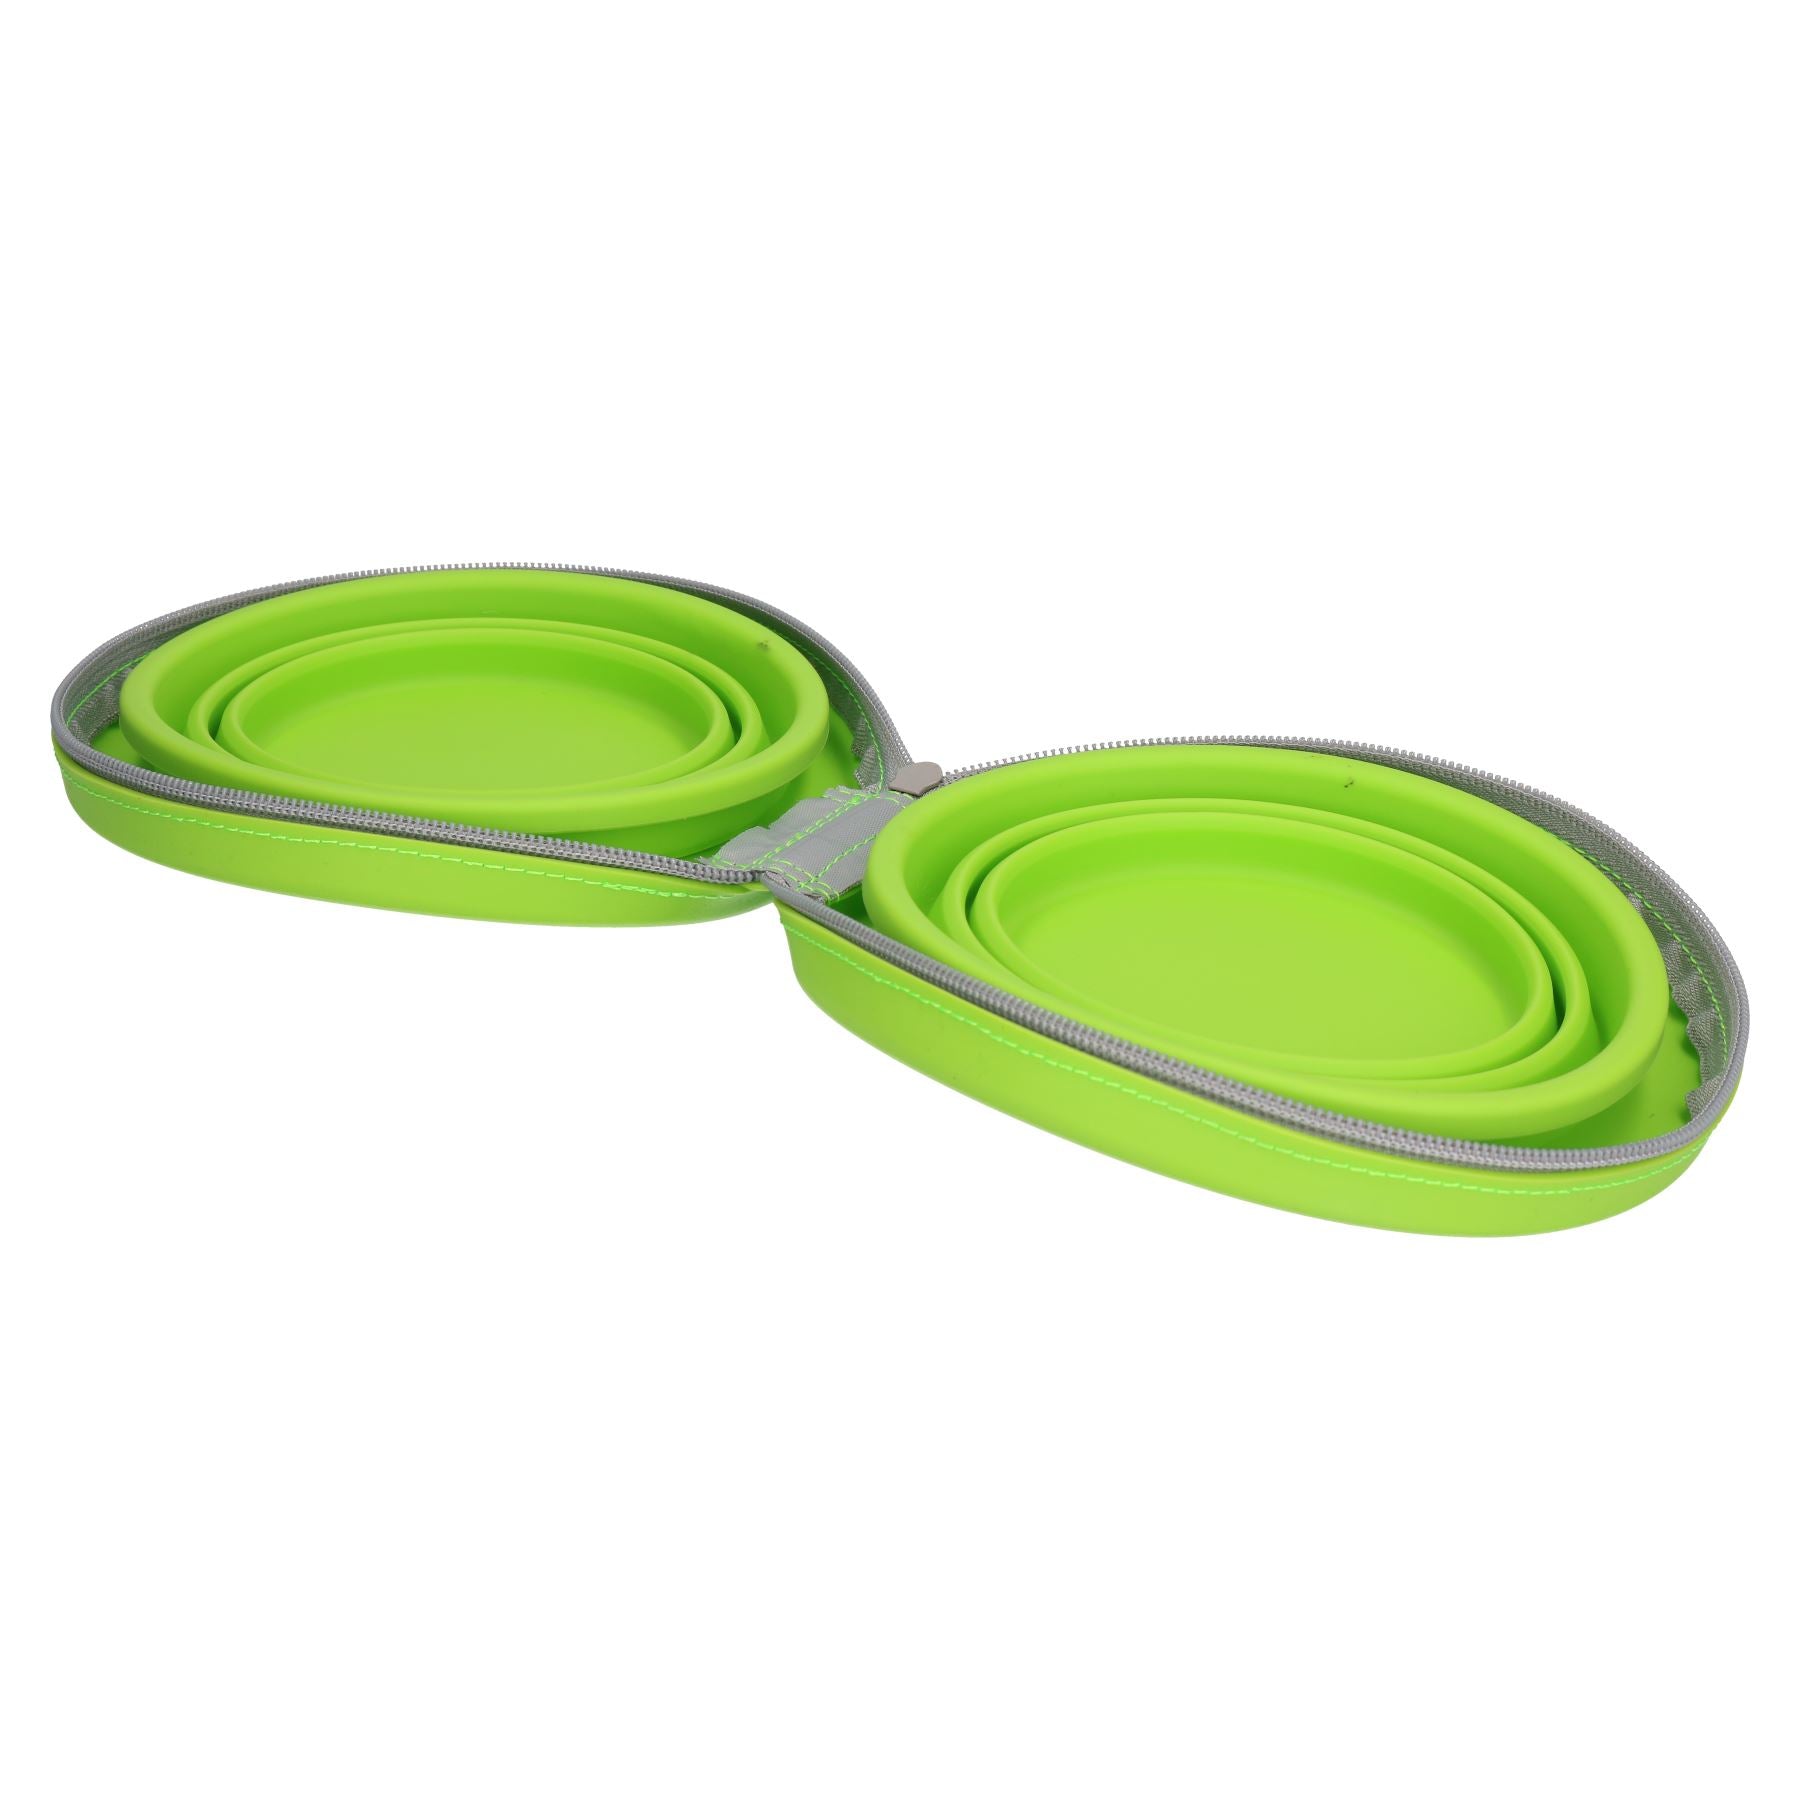 Collapsible Silicon Portable Dual Pet Dog Bowl Travel Accessory